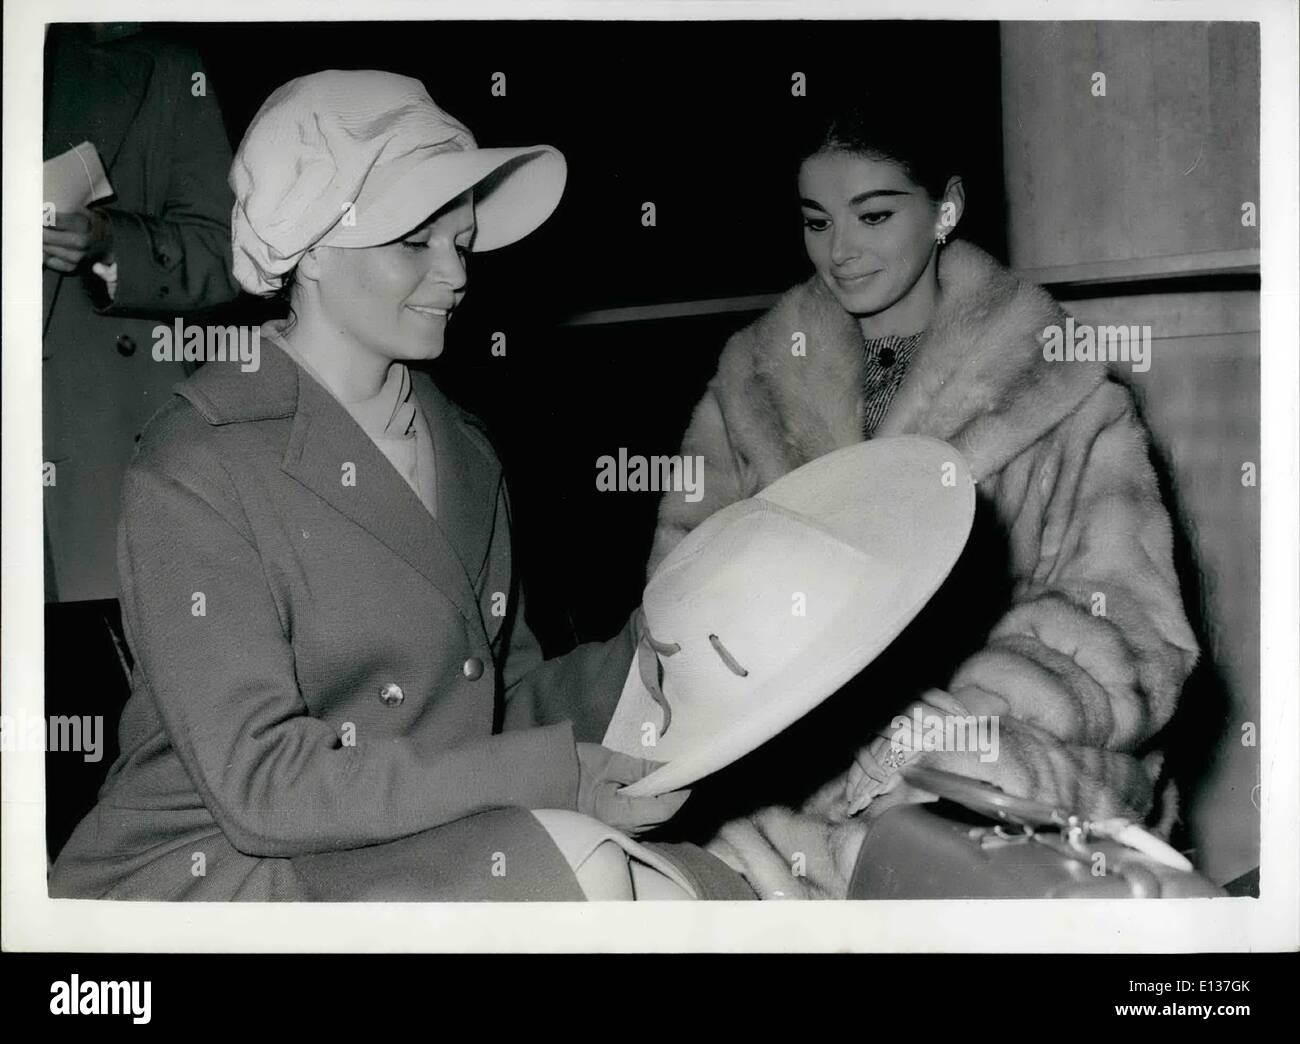 Feb. 29, 2012 - 18.14.59 Film Stars Leave for Canary Islands. Film stars, including Eva Bartok, Pier Angeli, Richard Attenborough and John Gregson, left Gatwick Airport today for the Canary Islands, for location shooting of the film S.O.S. Pacific . Keystone Photo Shows: Eva Bartok admires Pier Angeli's straw sun hat, which Miss Angeli carries every where, as a sort of mascot prior to their departure from Gatwick today. Stock Photo